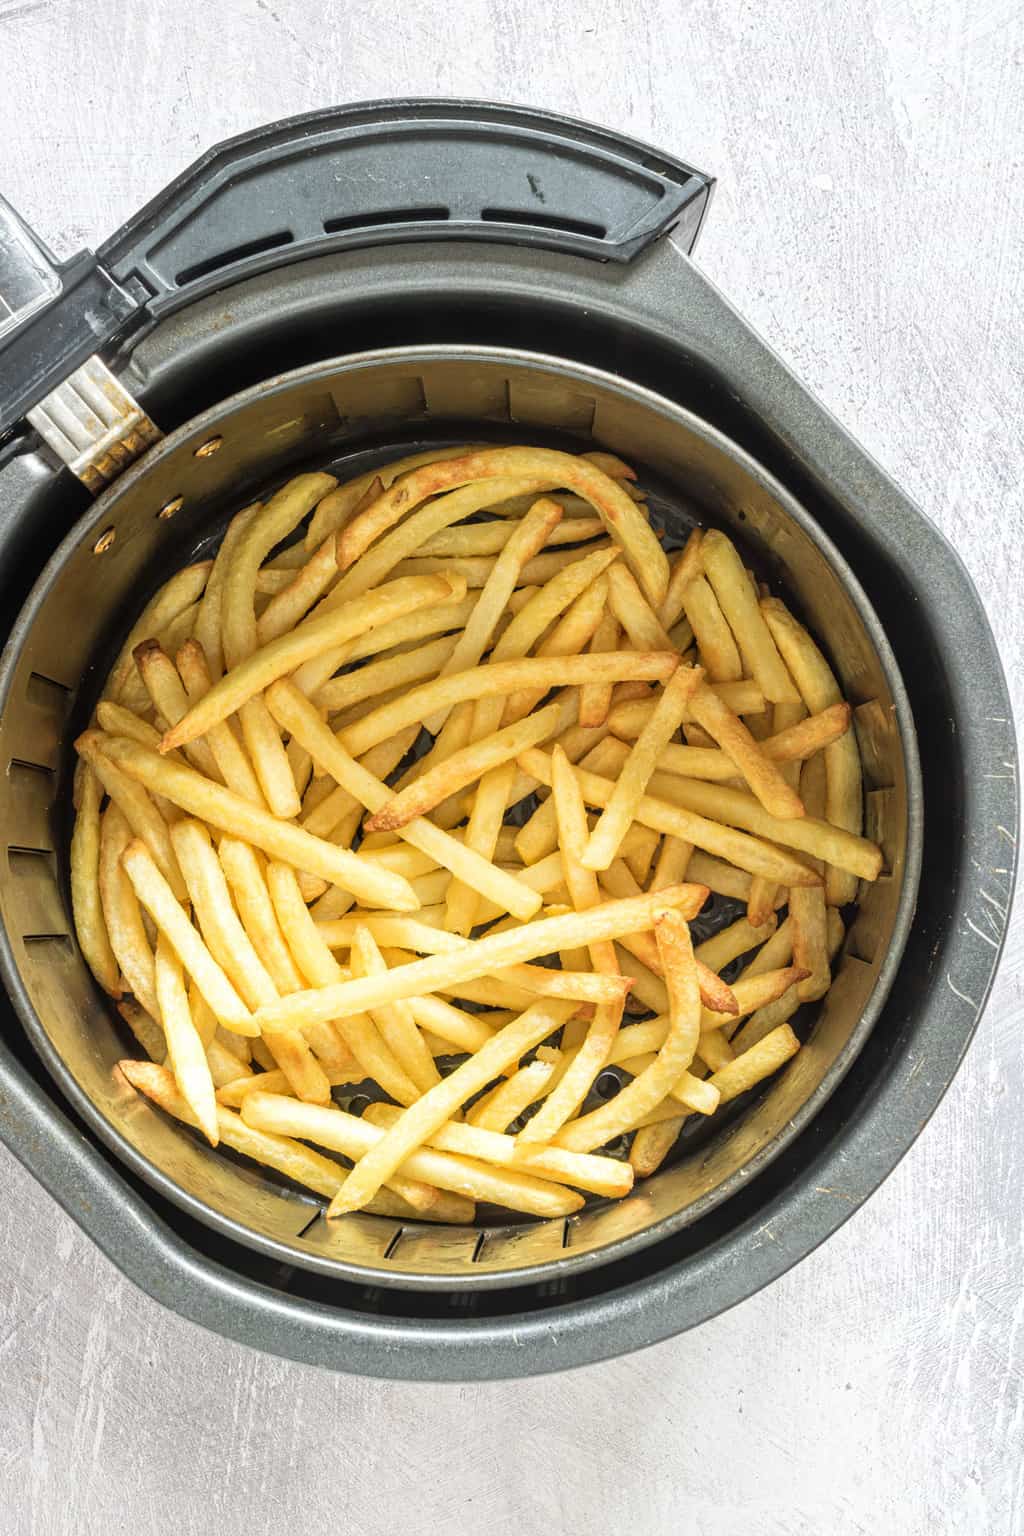 the cooked frozen french fries inside the air fryer basket